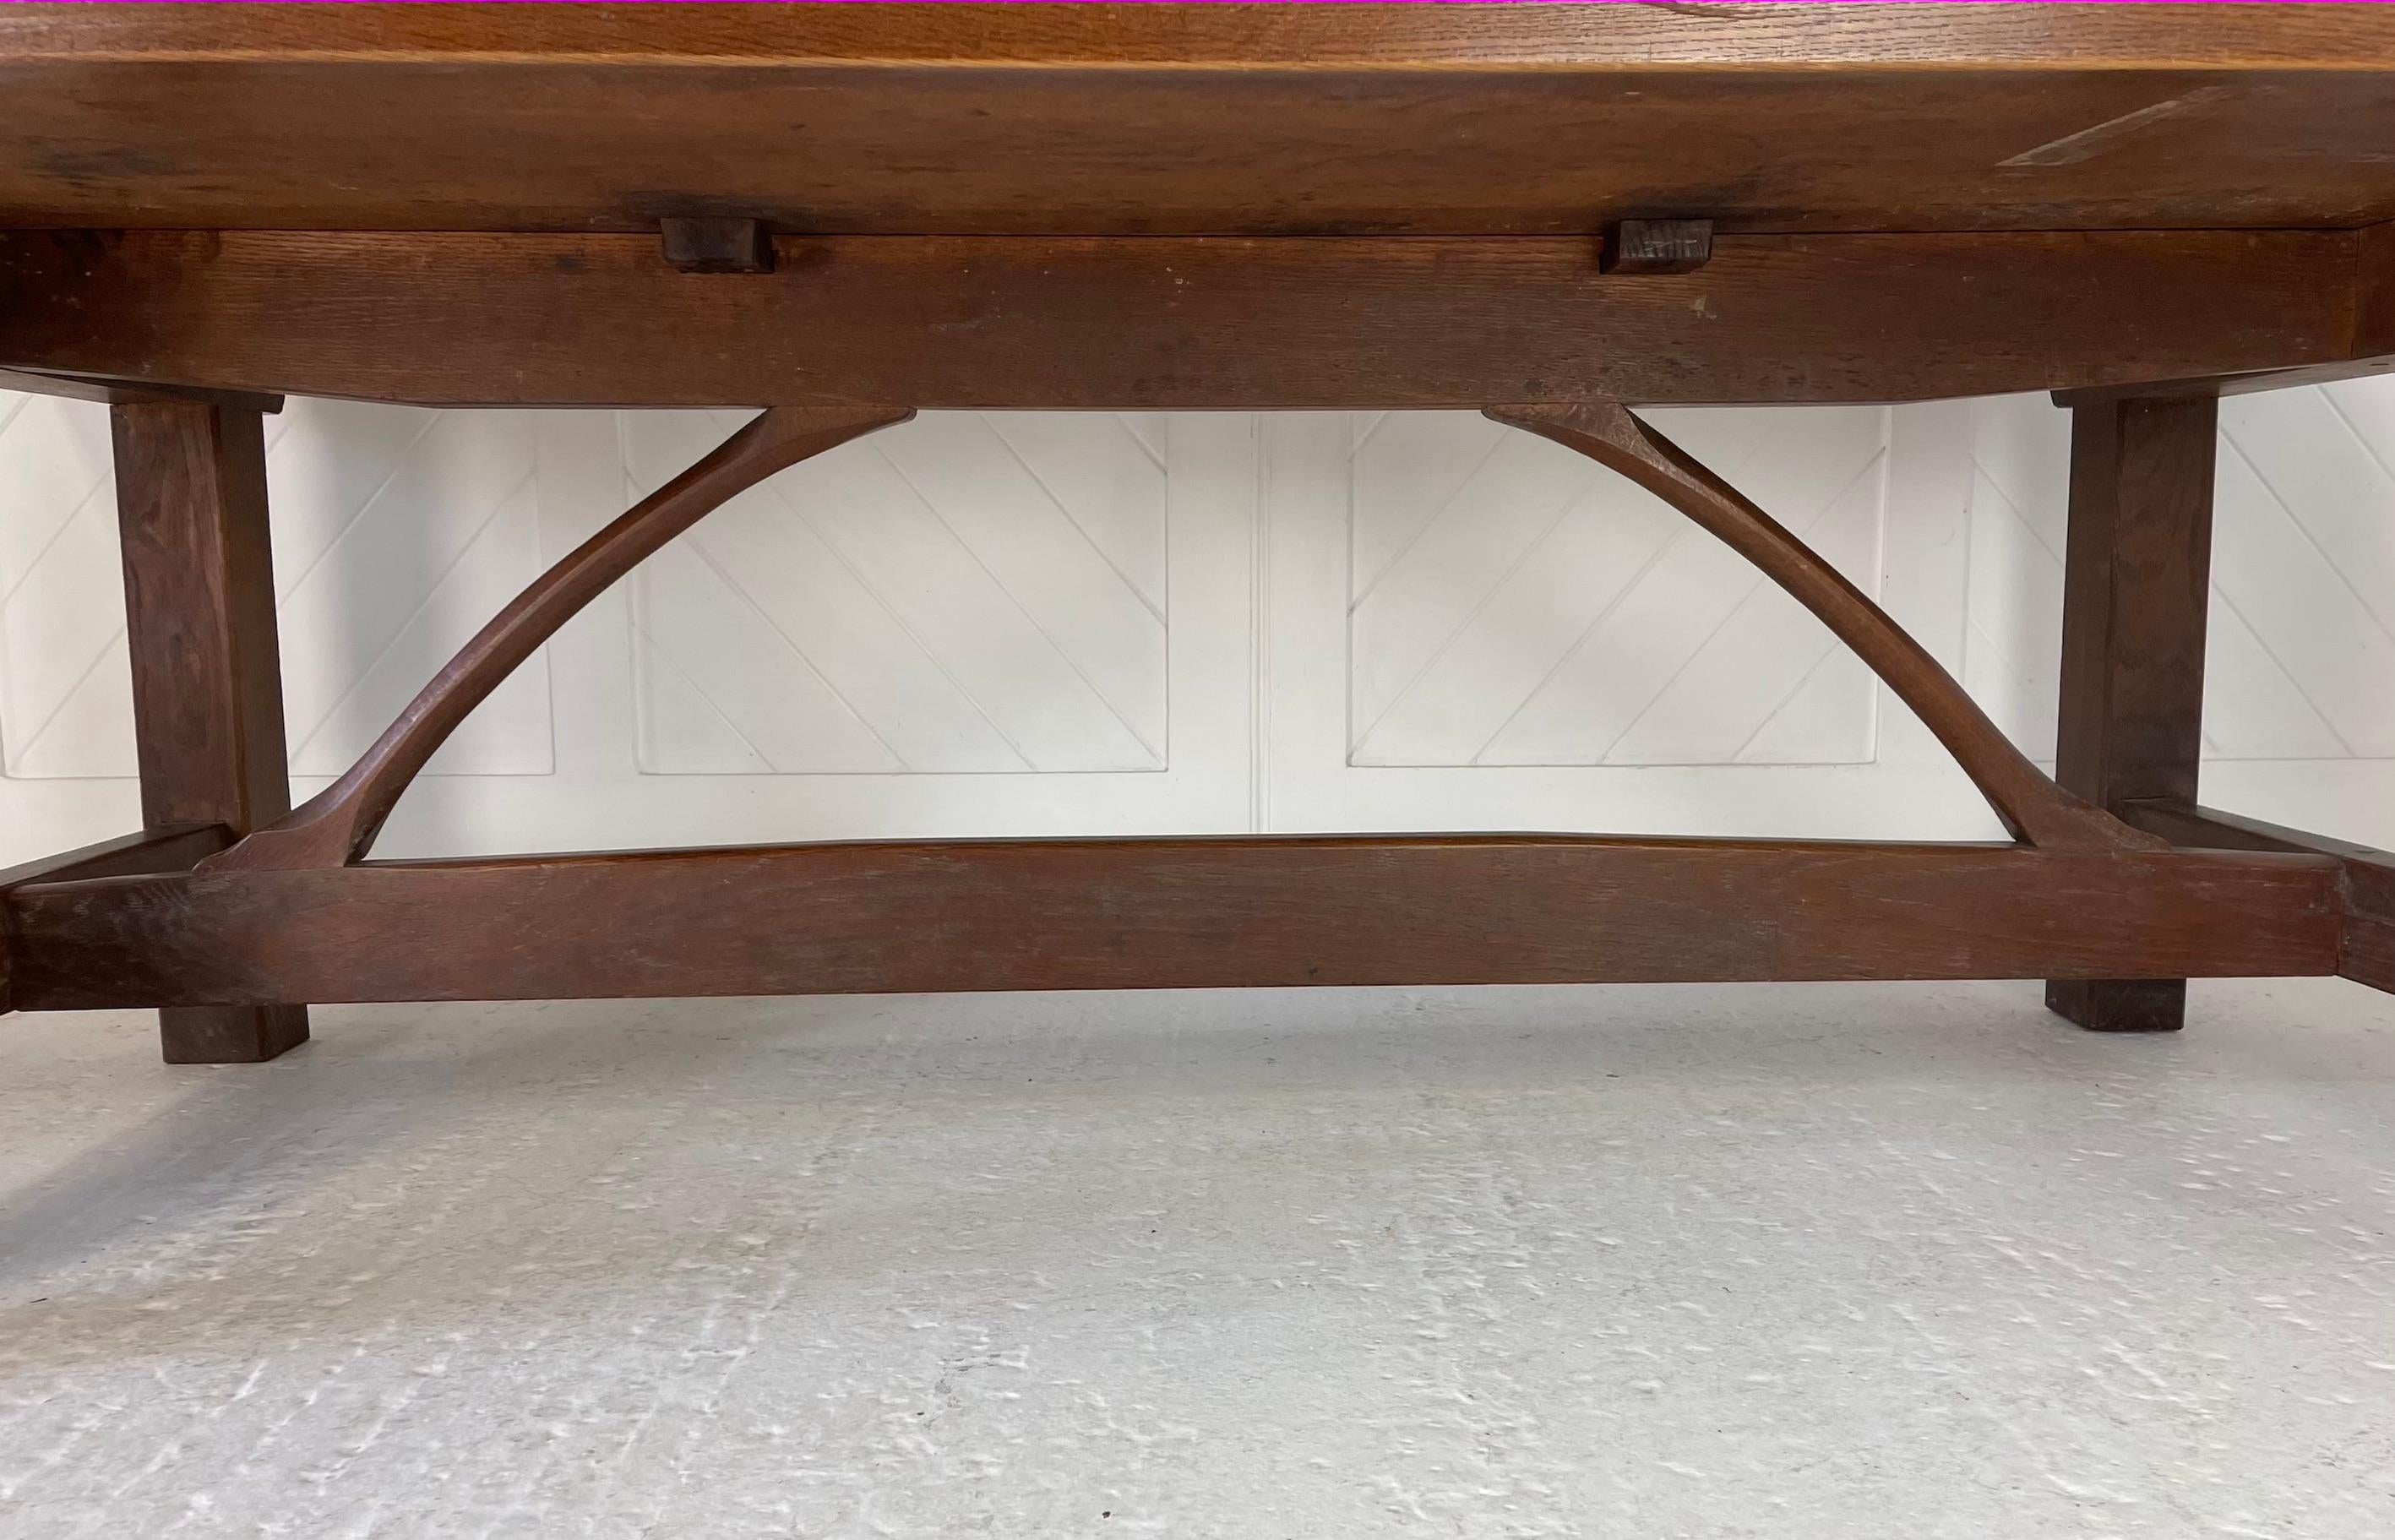 Early Important Arts & Crafts Wishbone Cotswold School refectory dining table in oak
3 plank top
Square through-tenon jointed legs with Wishbone bracing
Maker Sidney Barnsley
Designer Ernest Gimson
Circa 1894-1900
Pinbury Workshop

PROVENANCE :